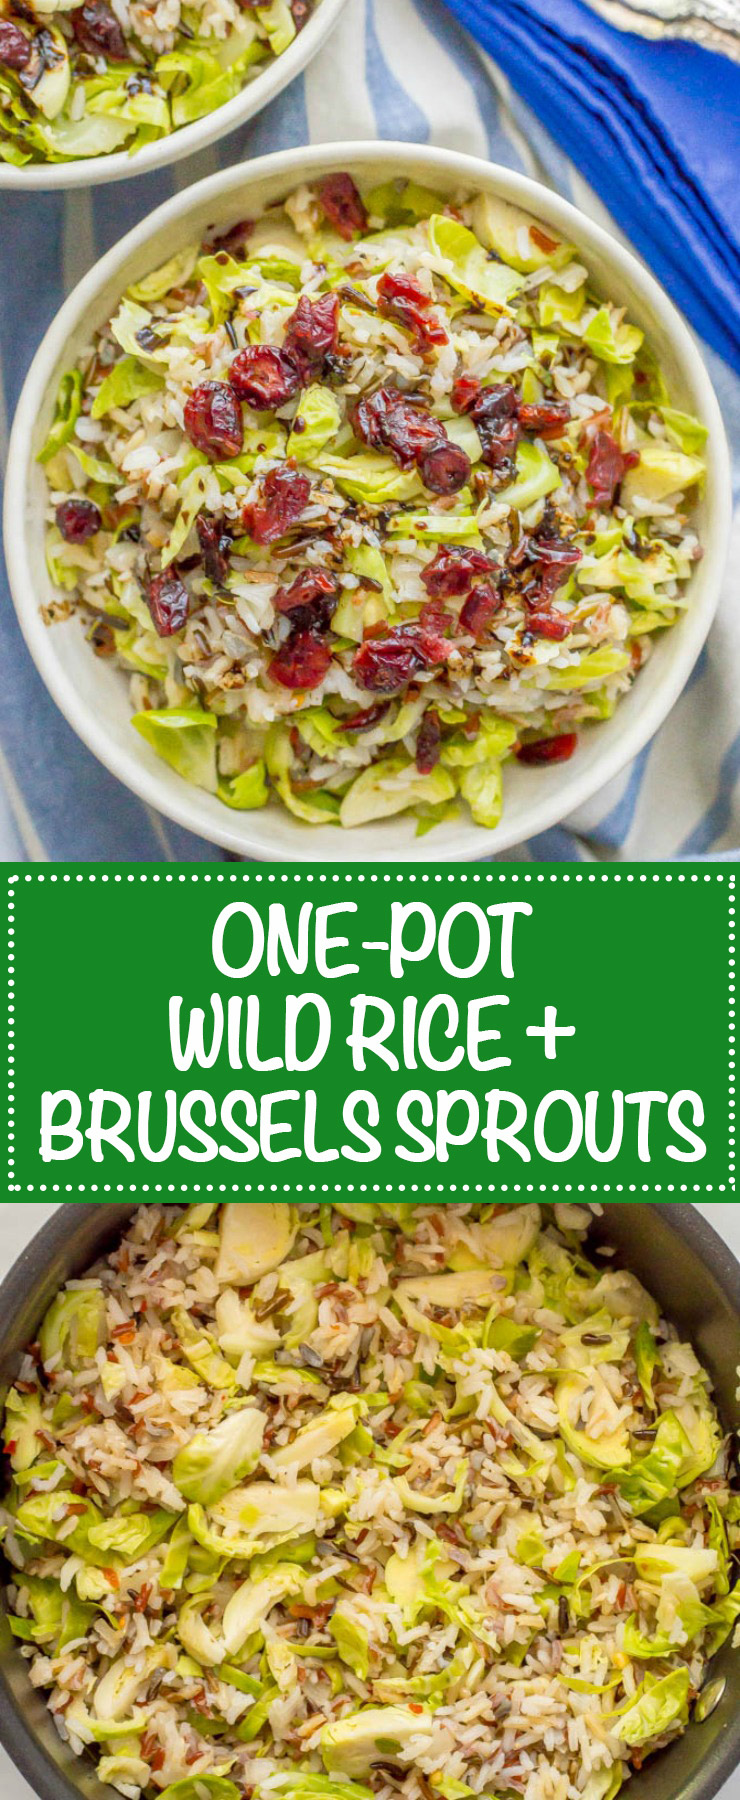 This one-pot wild rice and Brussels sprouts salad is a warm hug in a bowl! It’s an easy side dish with just a few ingredients but has all the cozy fall feelings! | www.familyfoodonthetable.com